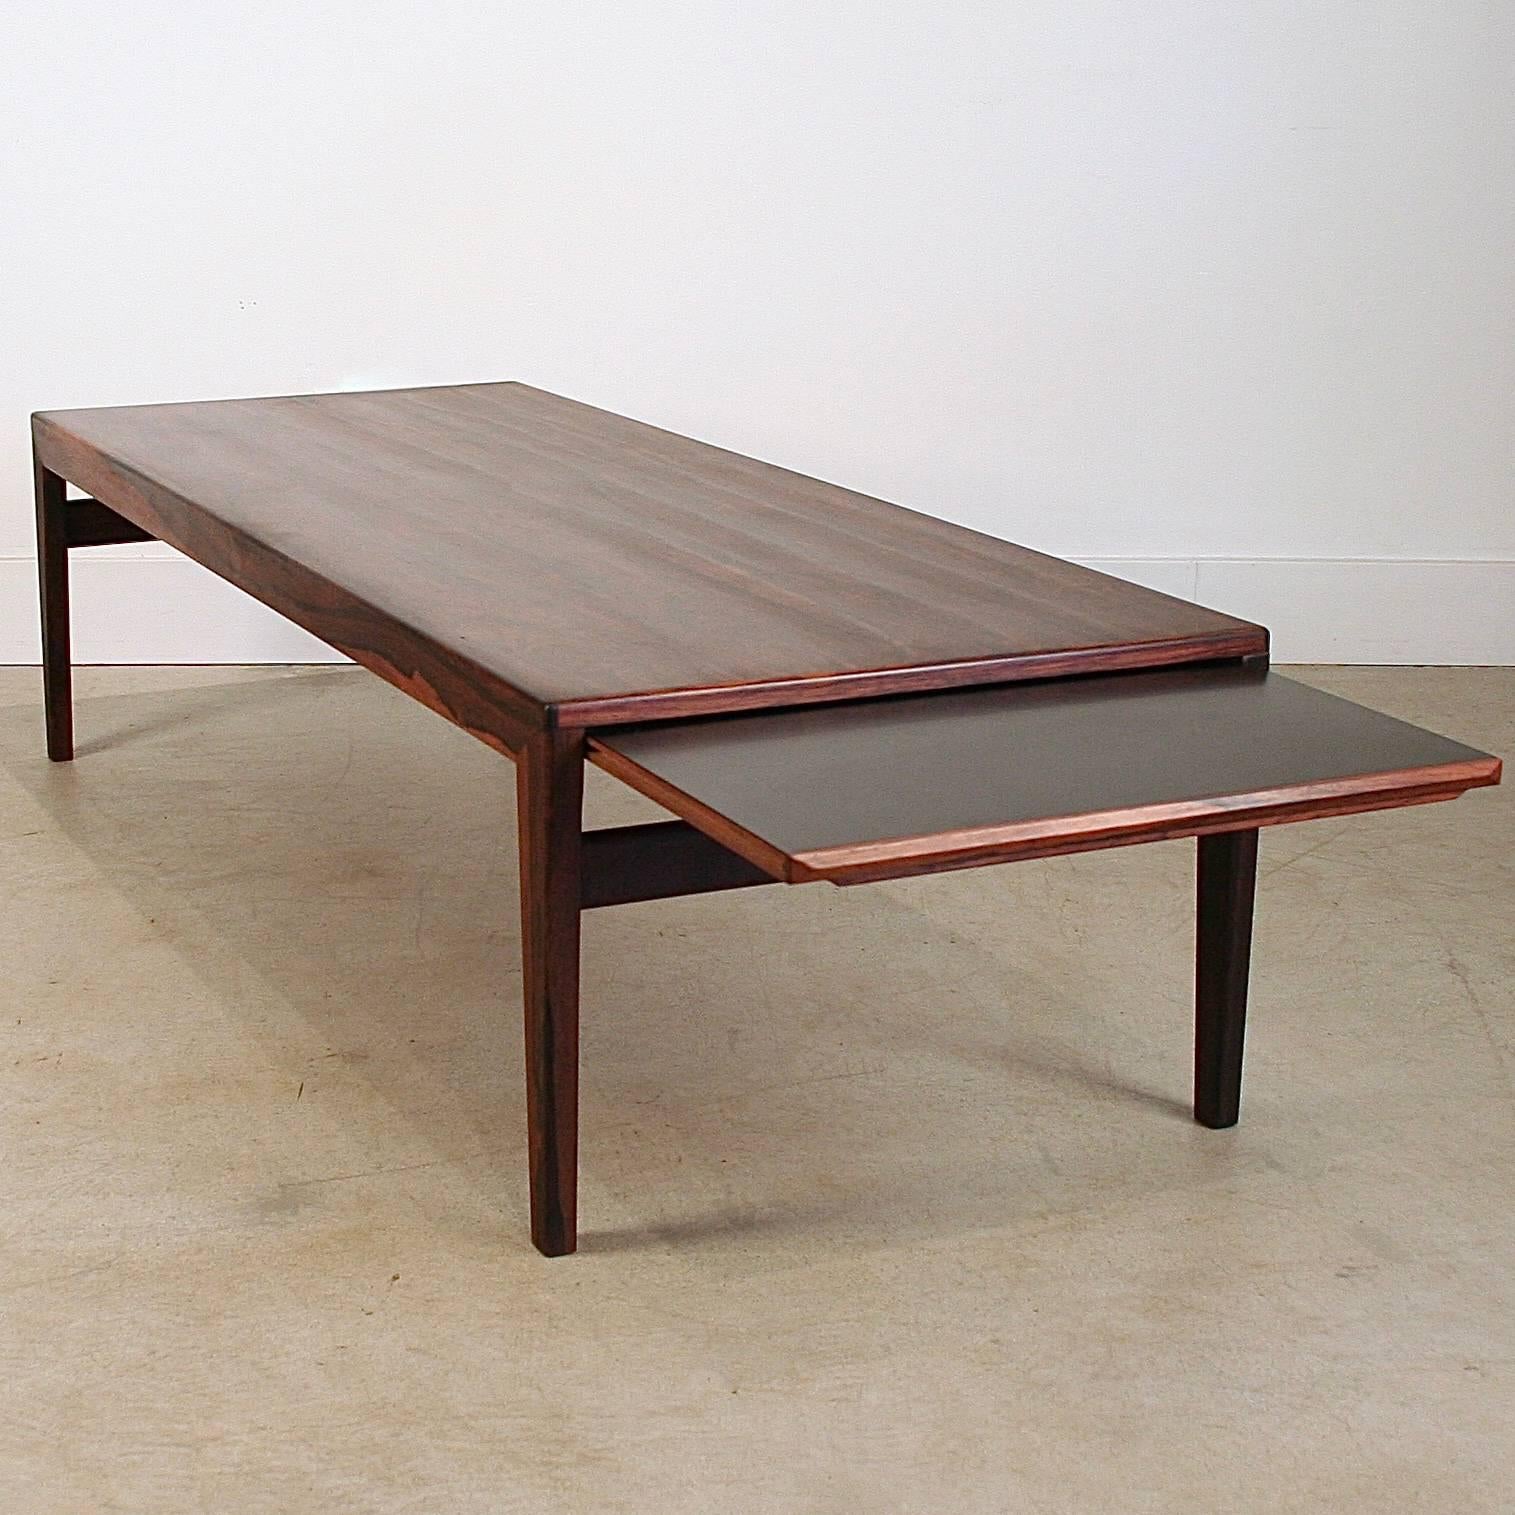 Mid-20th Century Vintage Danish Rosewood Coffee Table For Sale